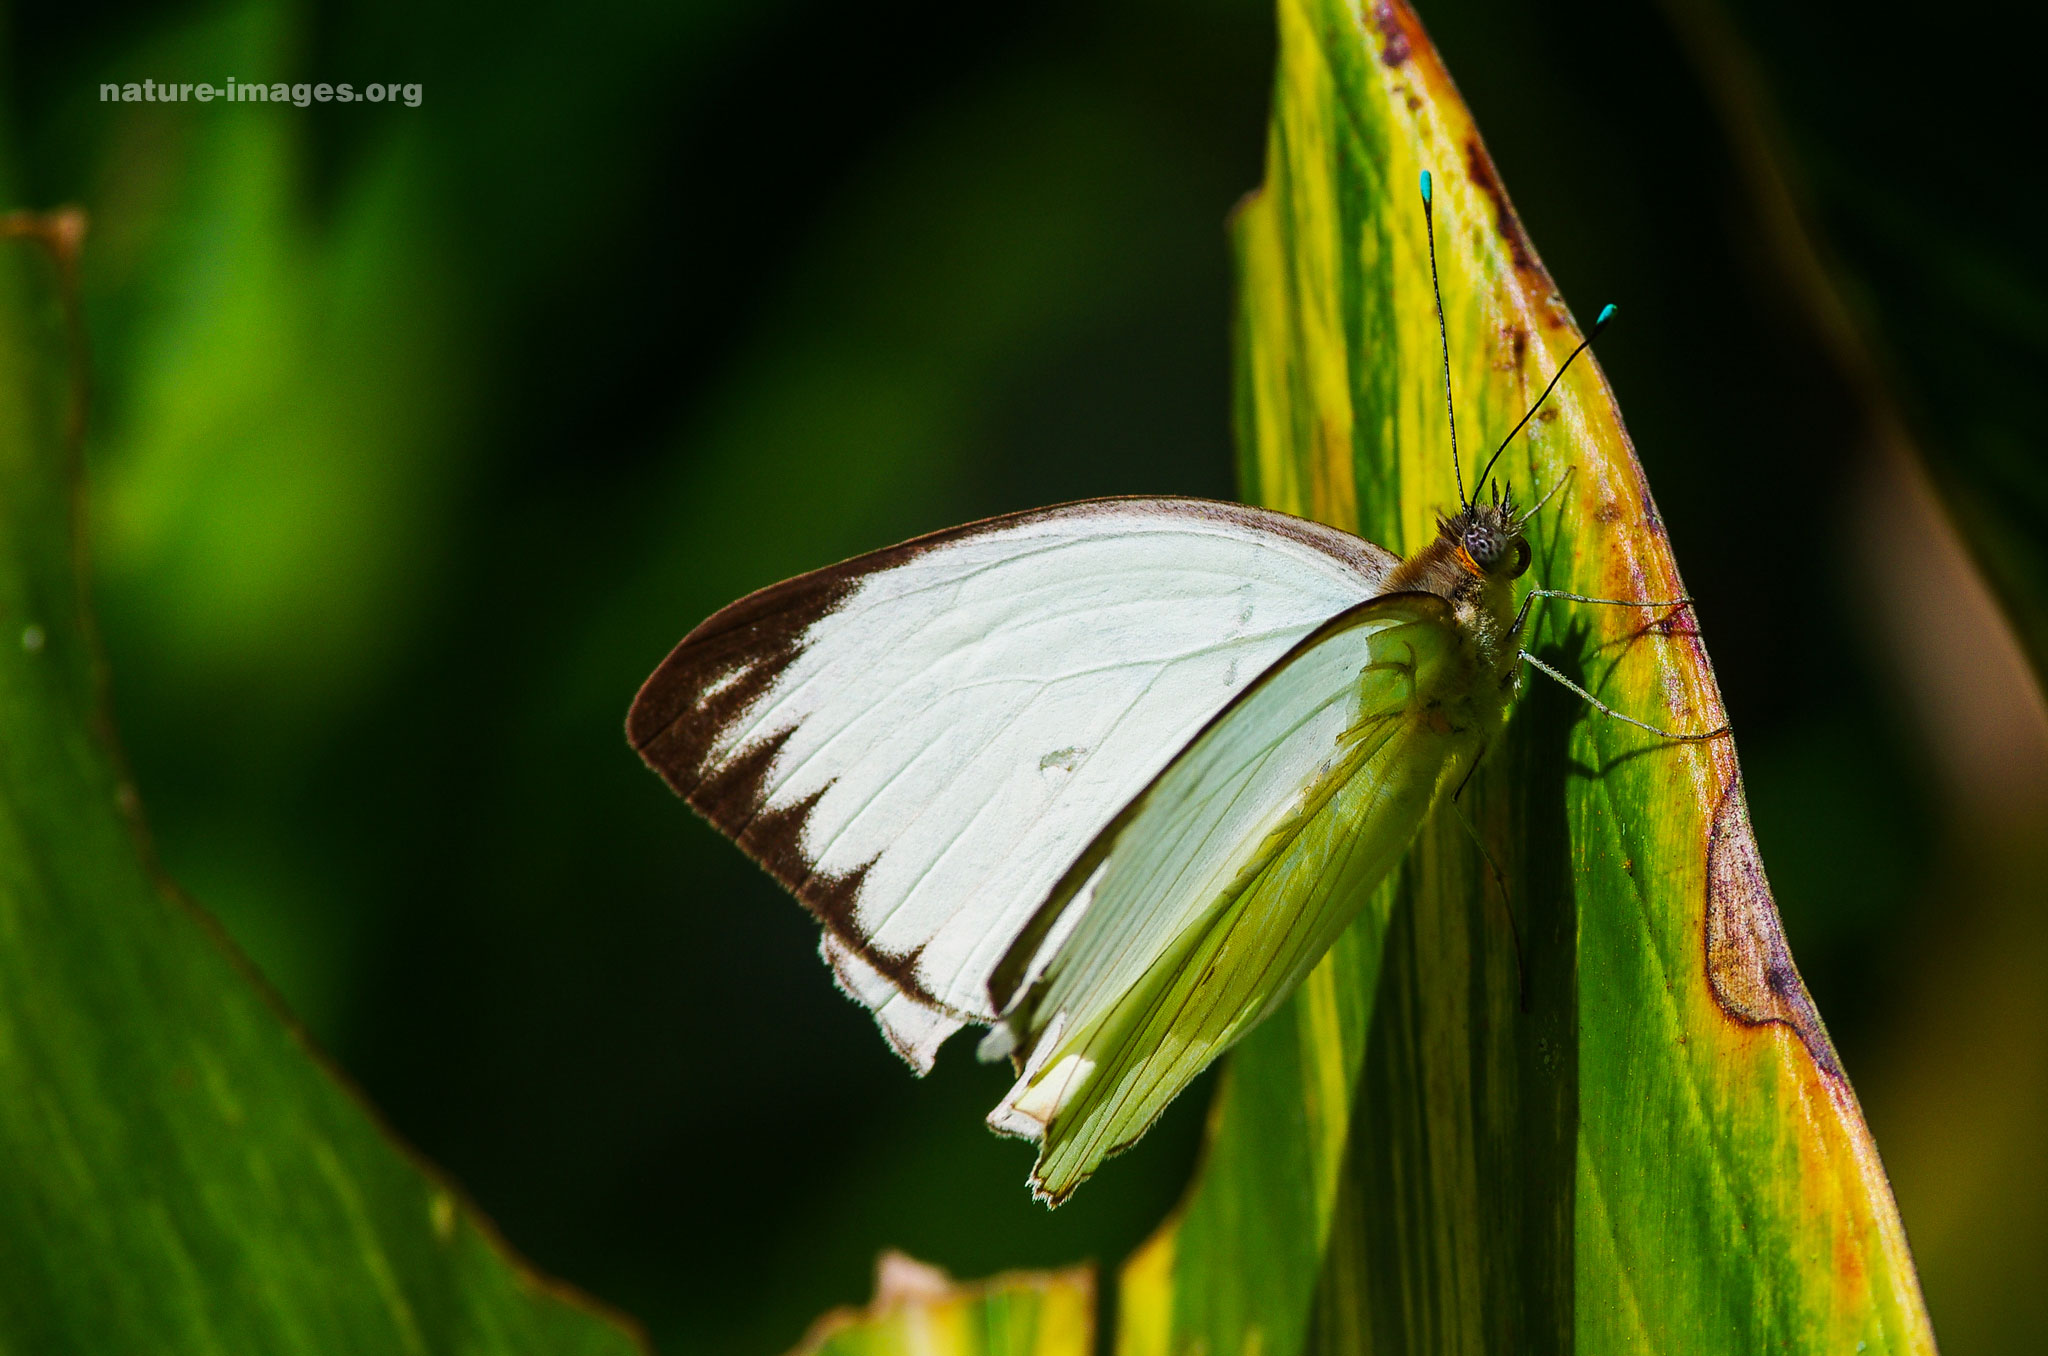 Great southern white